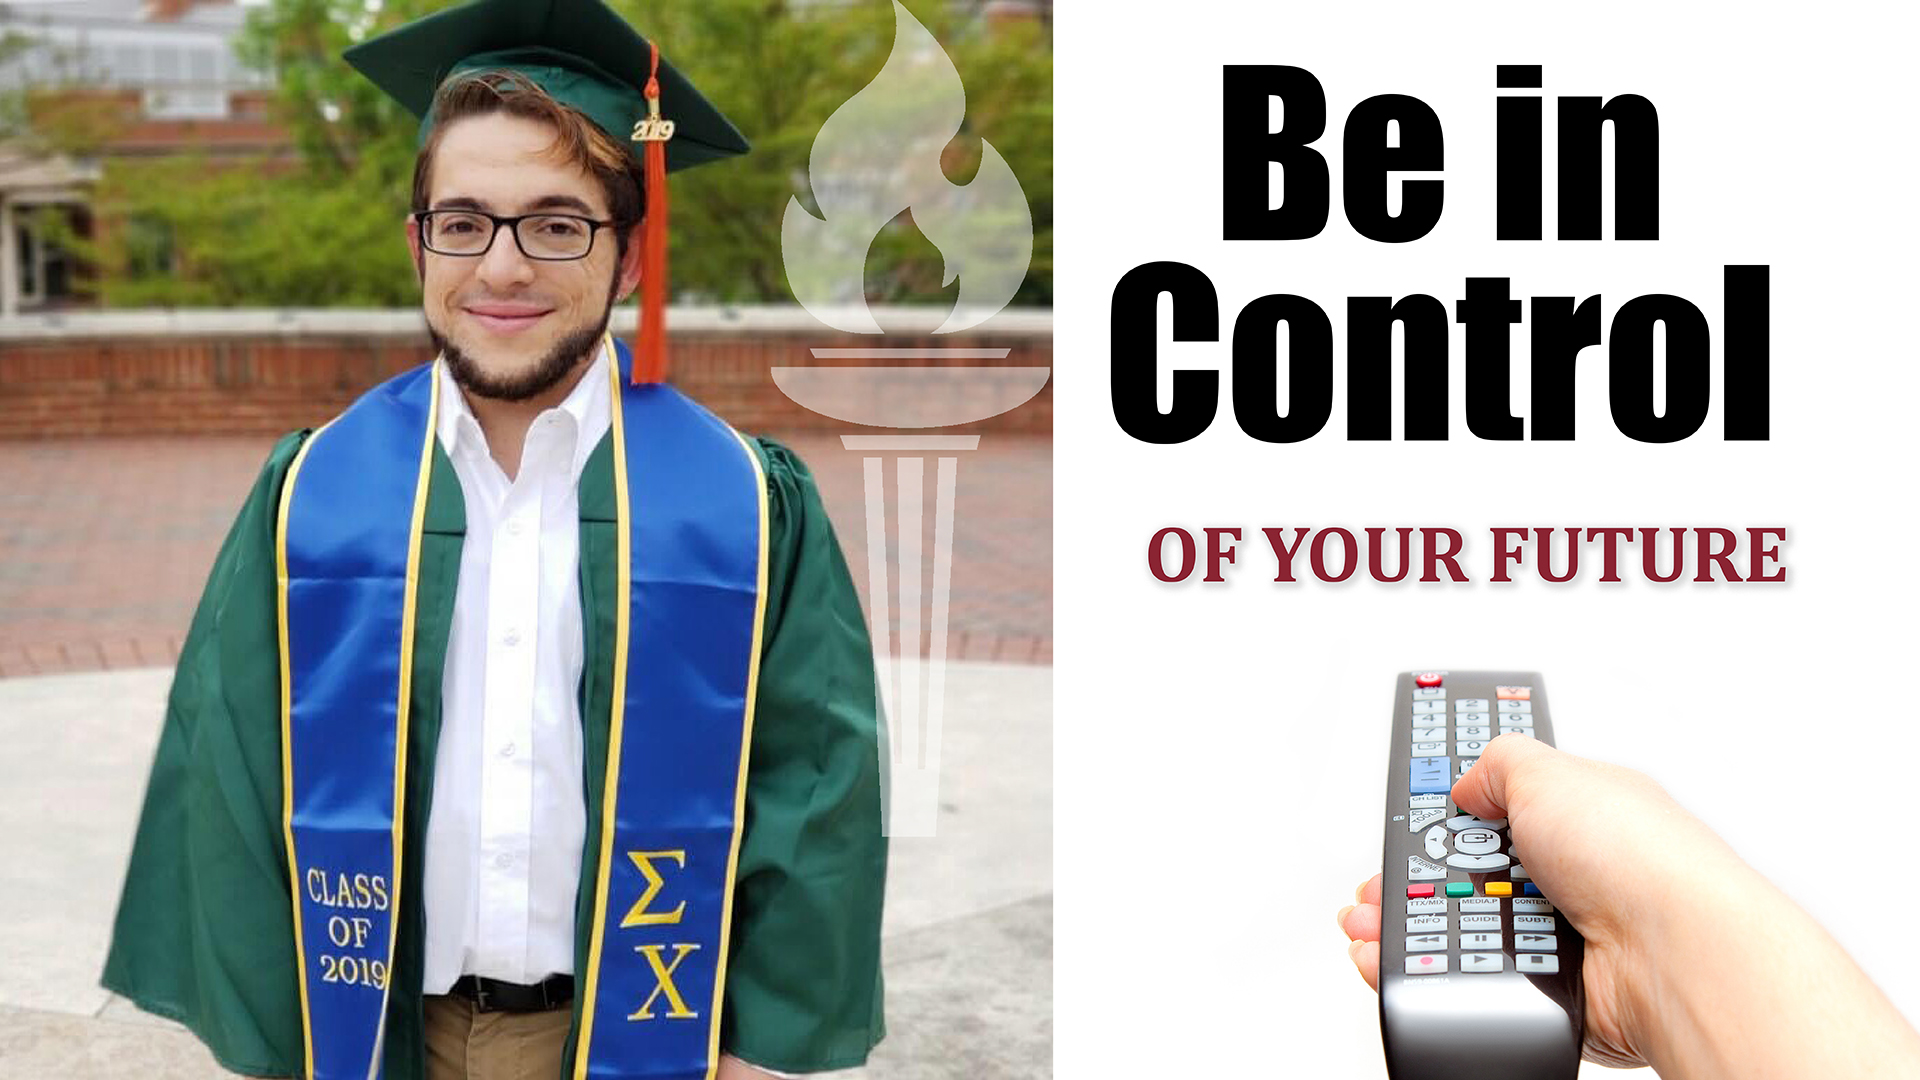 Thomas Aflredson's photo with Be In Control of Your Future